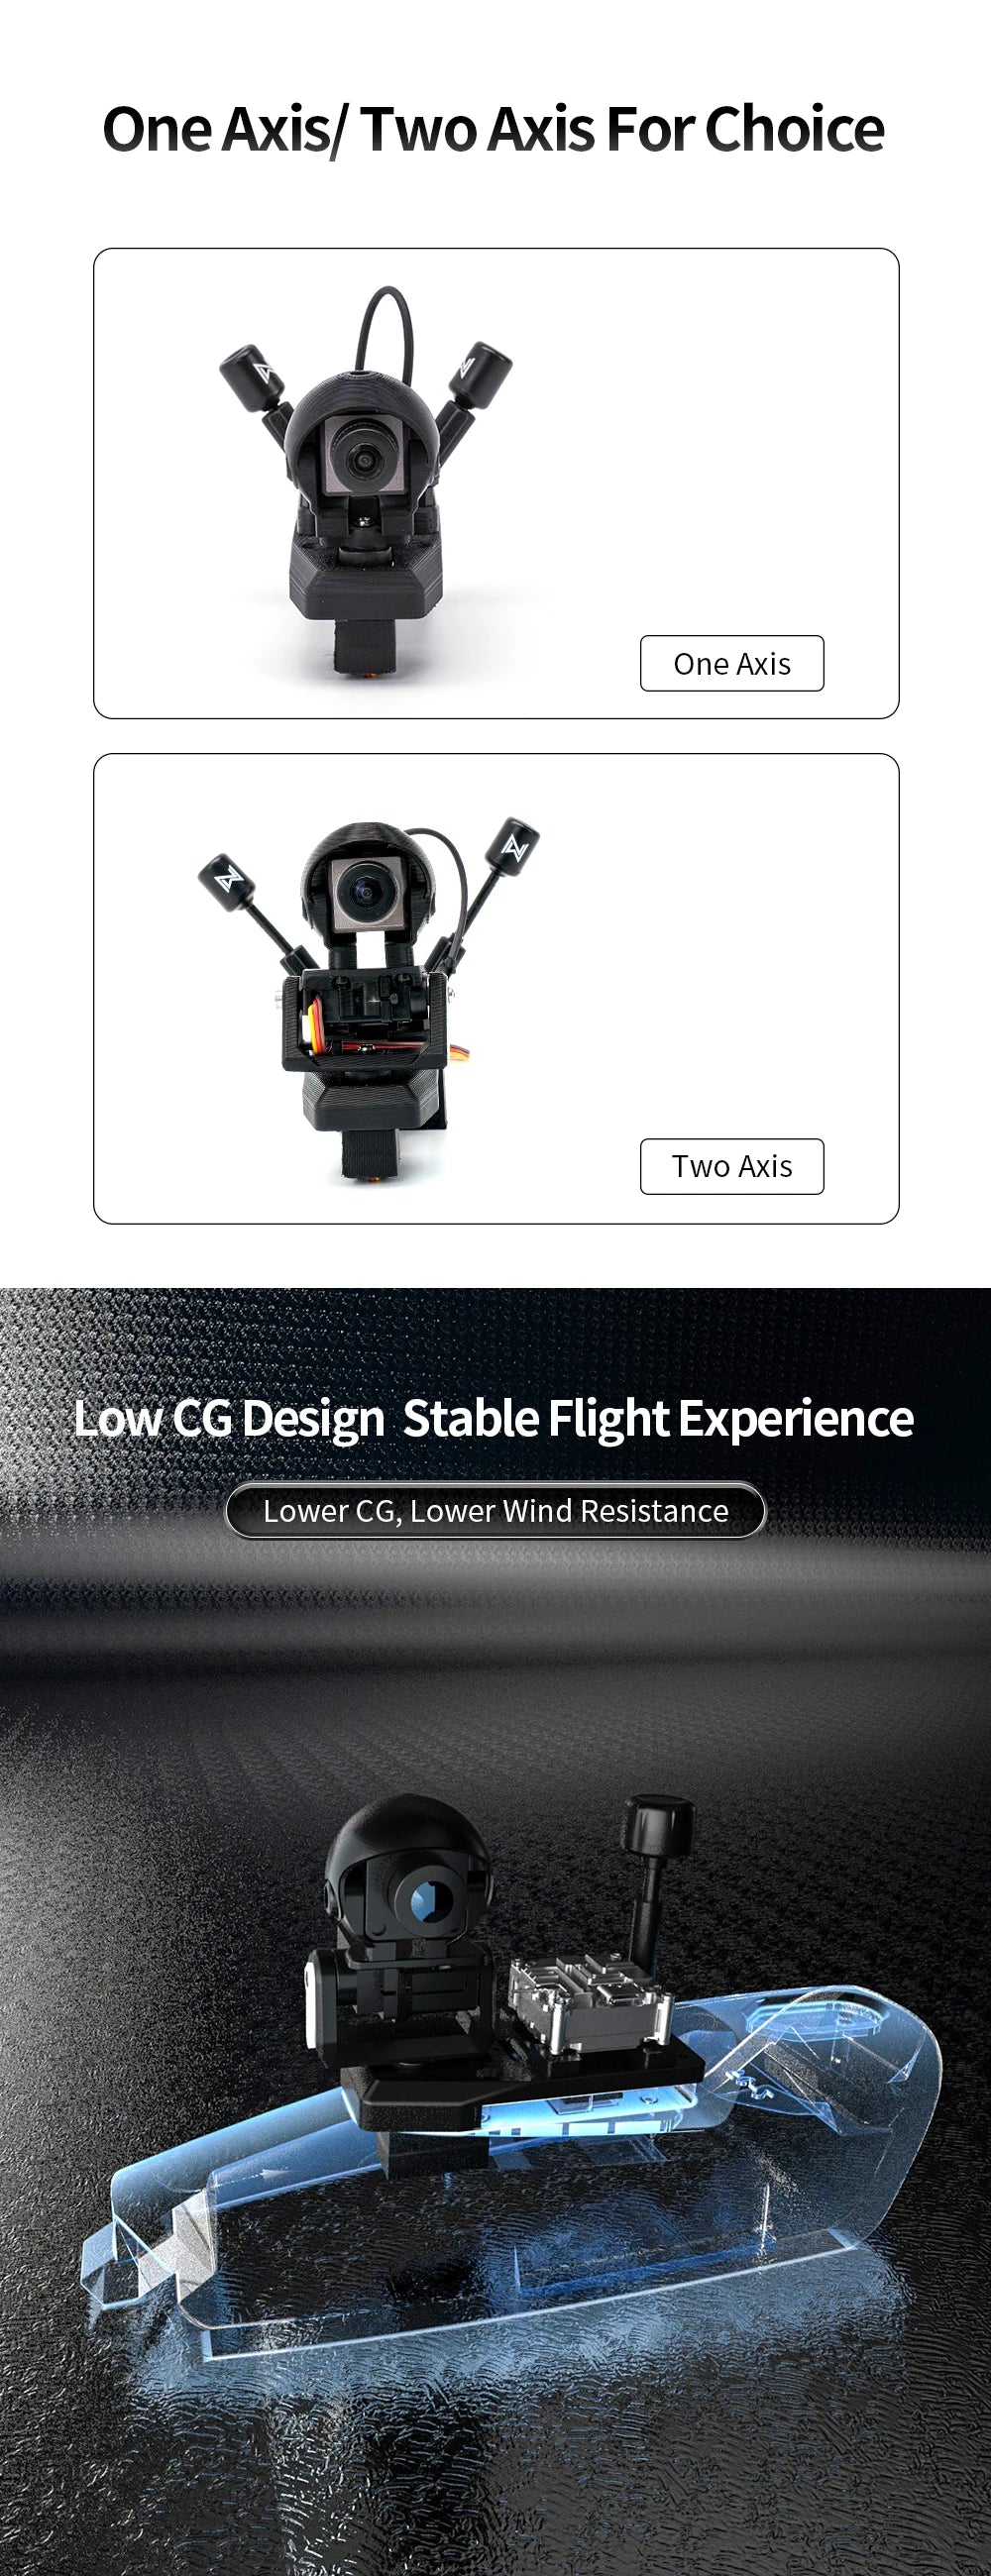 ATOMRC 1 Axis 2 Axis Gimbal, One Axis/ Two AXIS Design Stable Flight Experience Lower CG, Lower